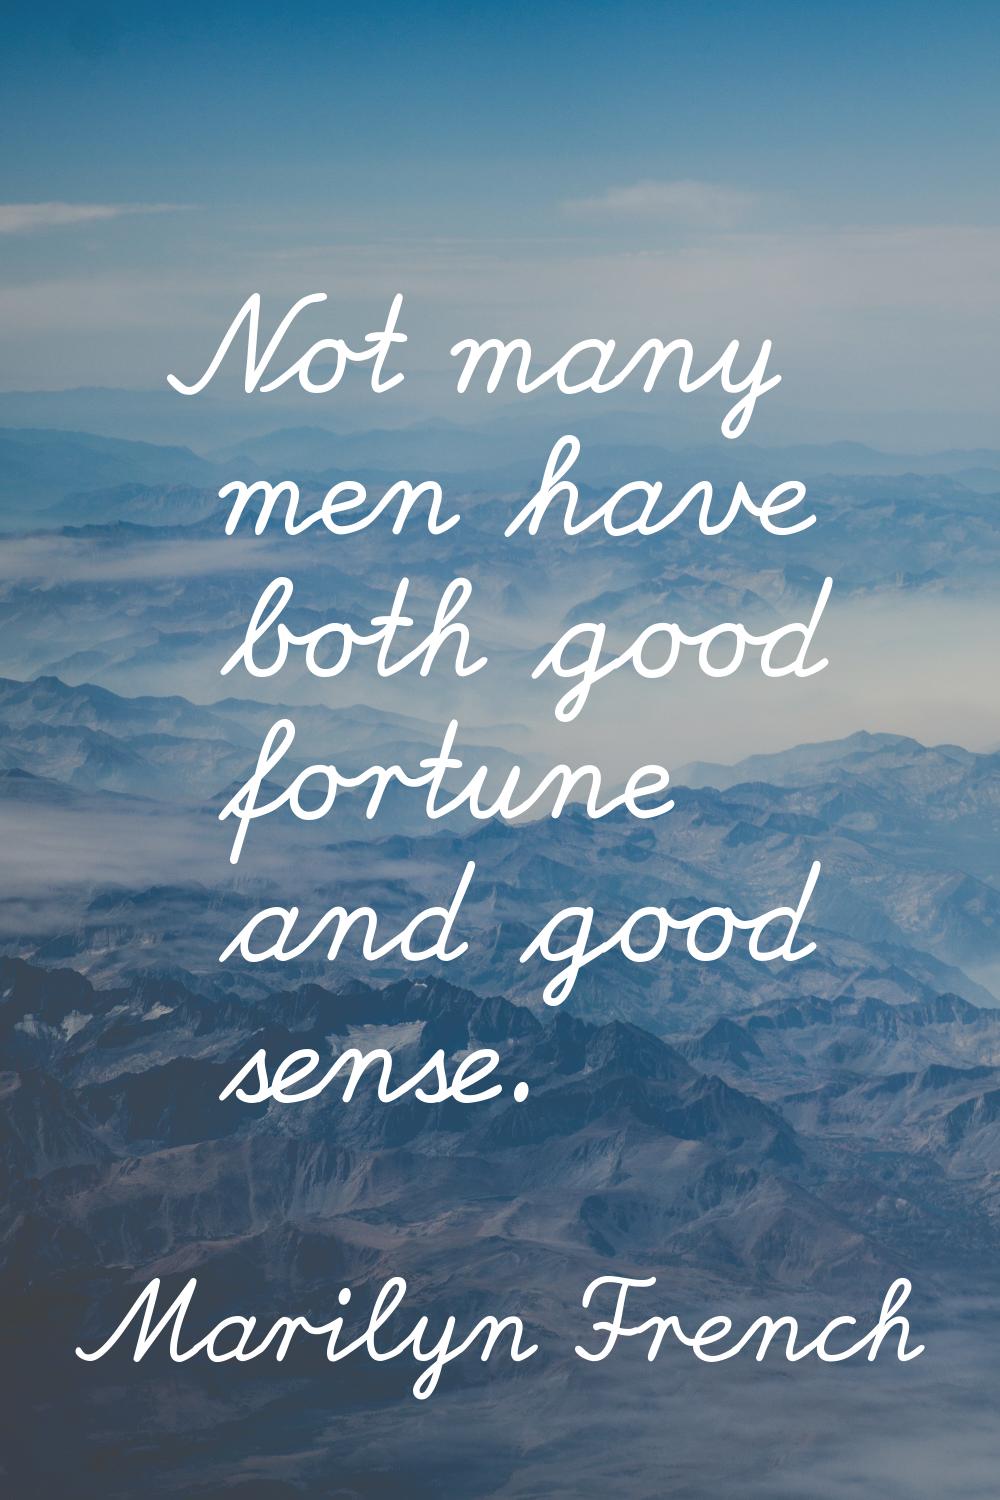 Not many men have both good fortune and good sense.